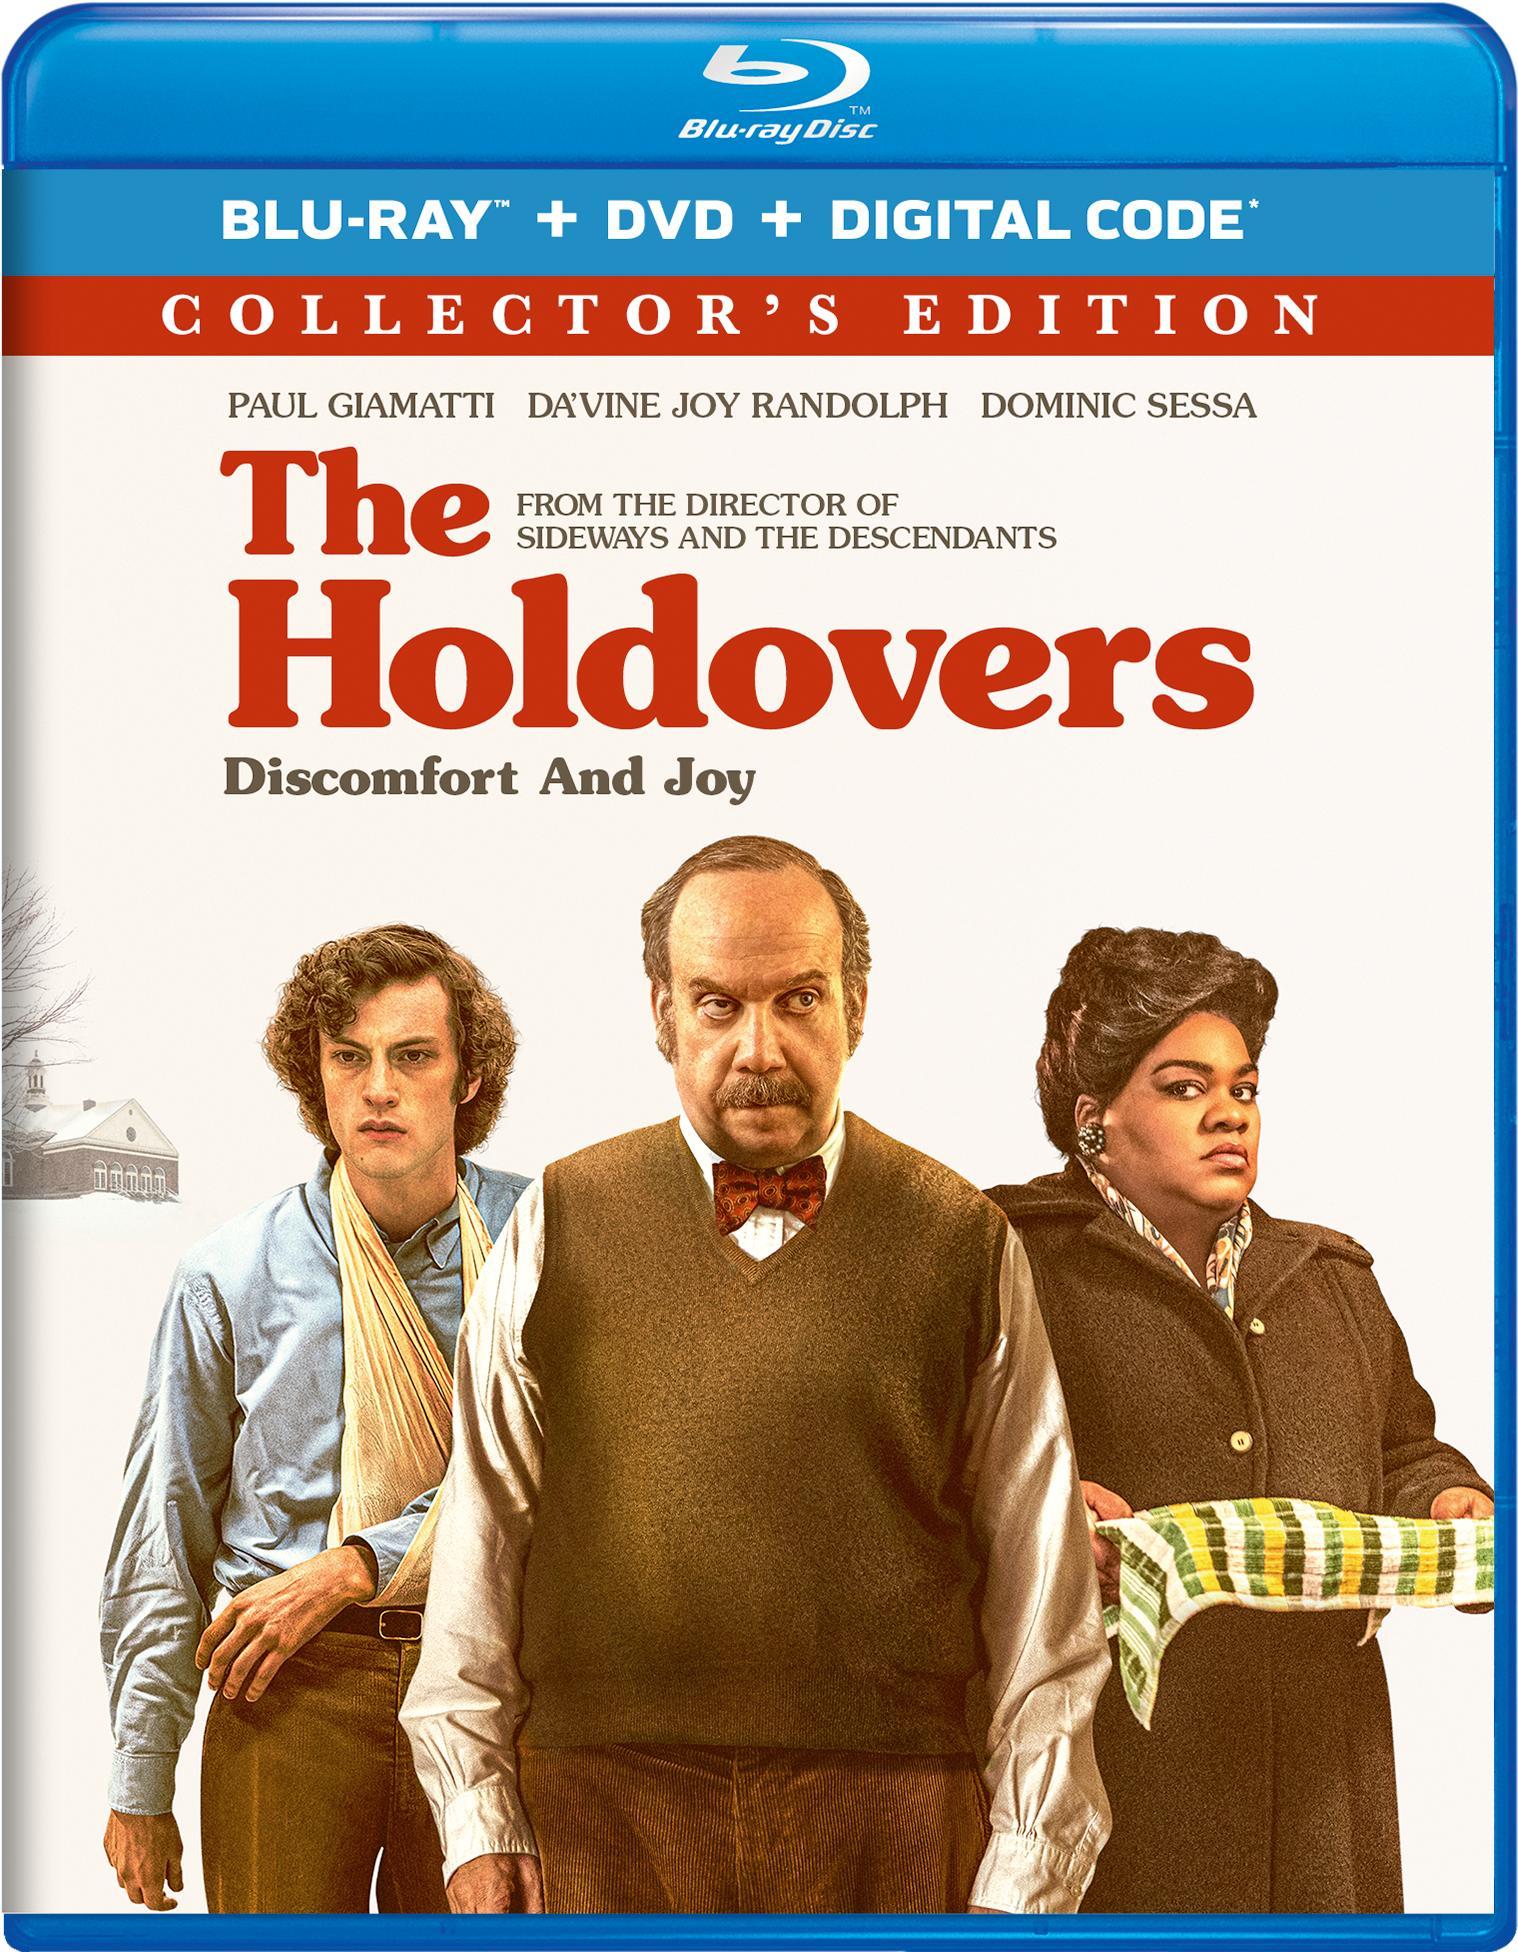 The Holdovers (with DVD) - Blu-ray